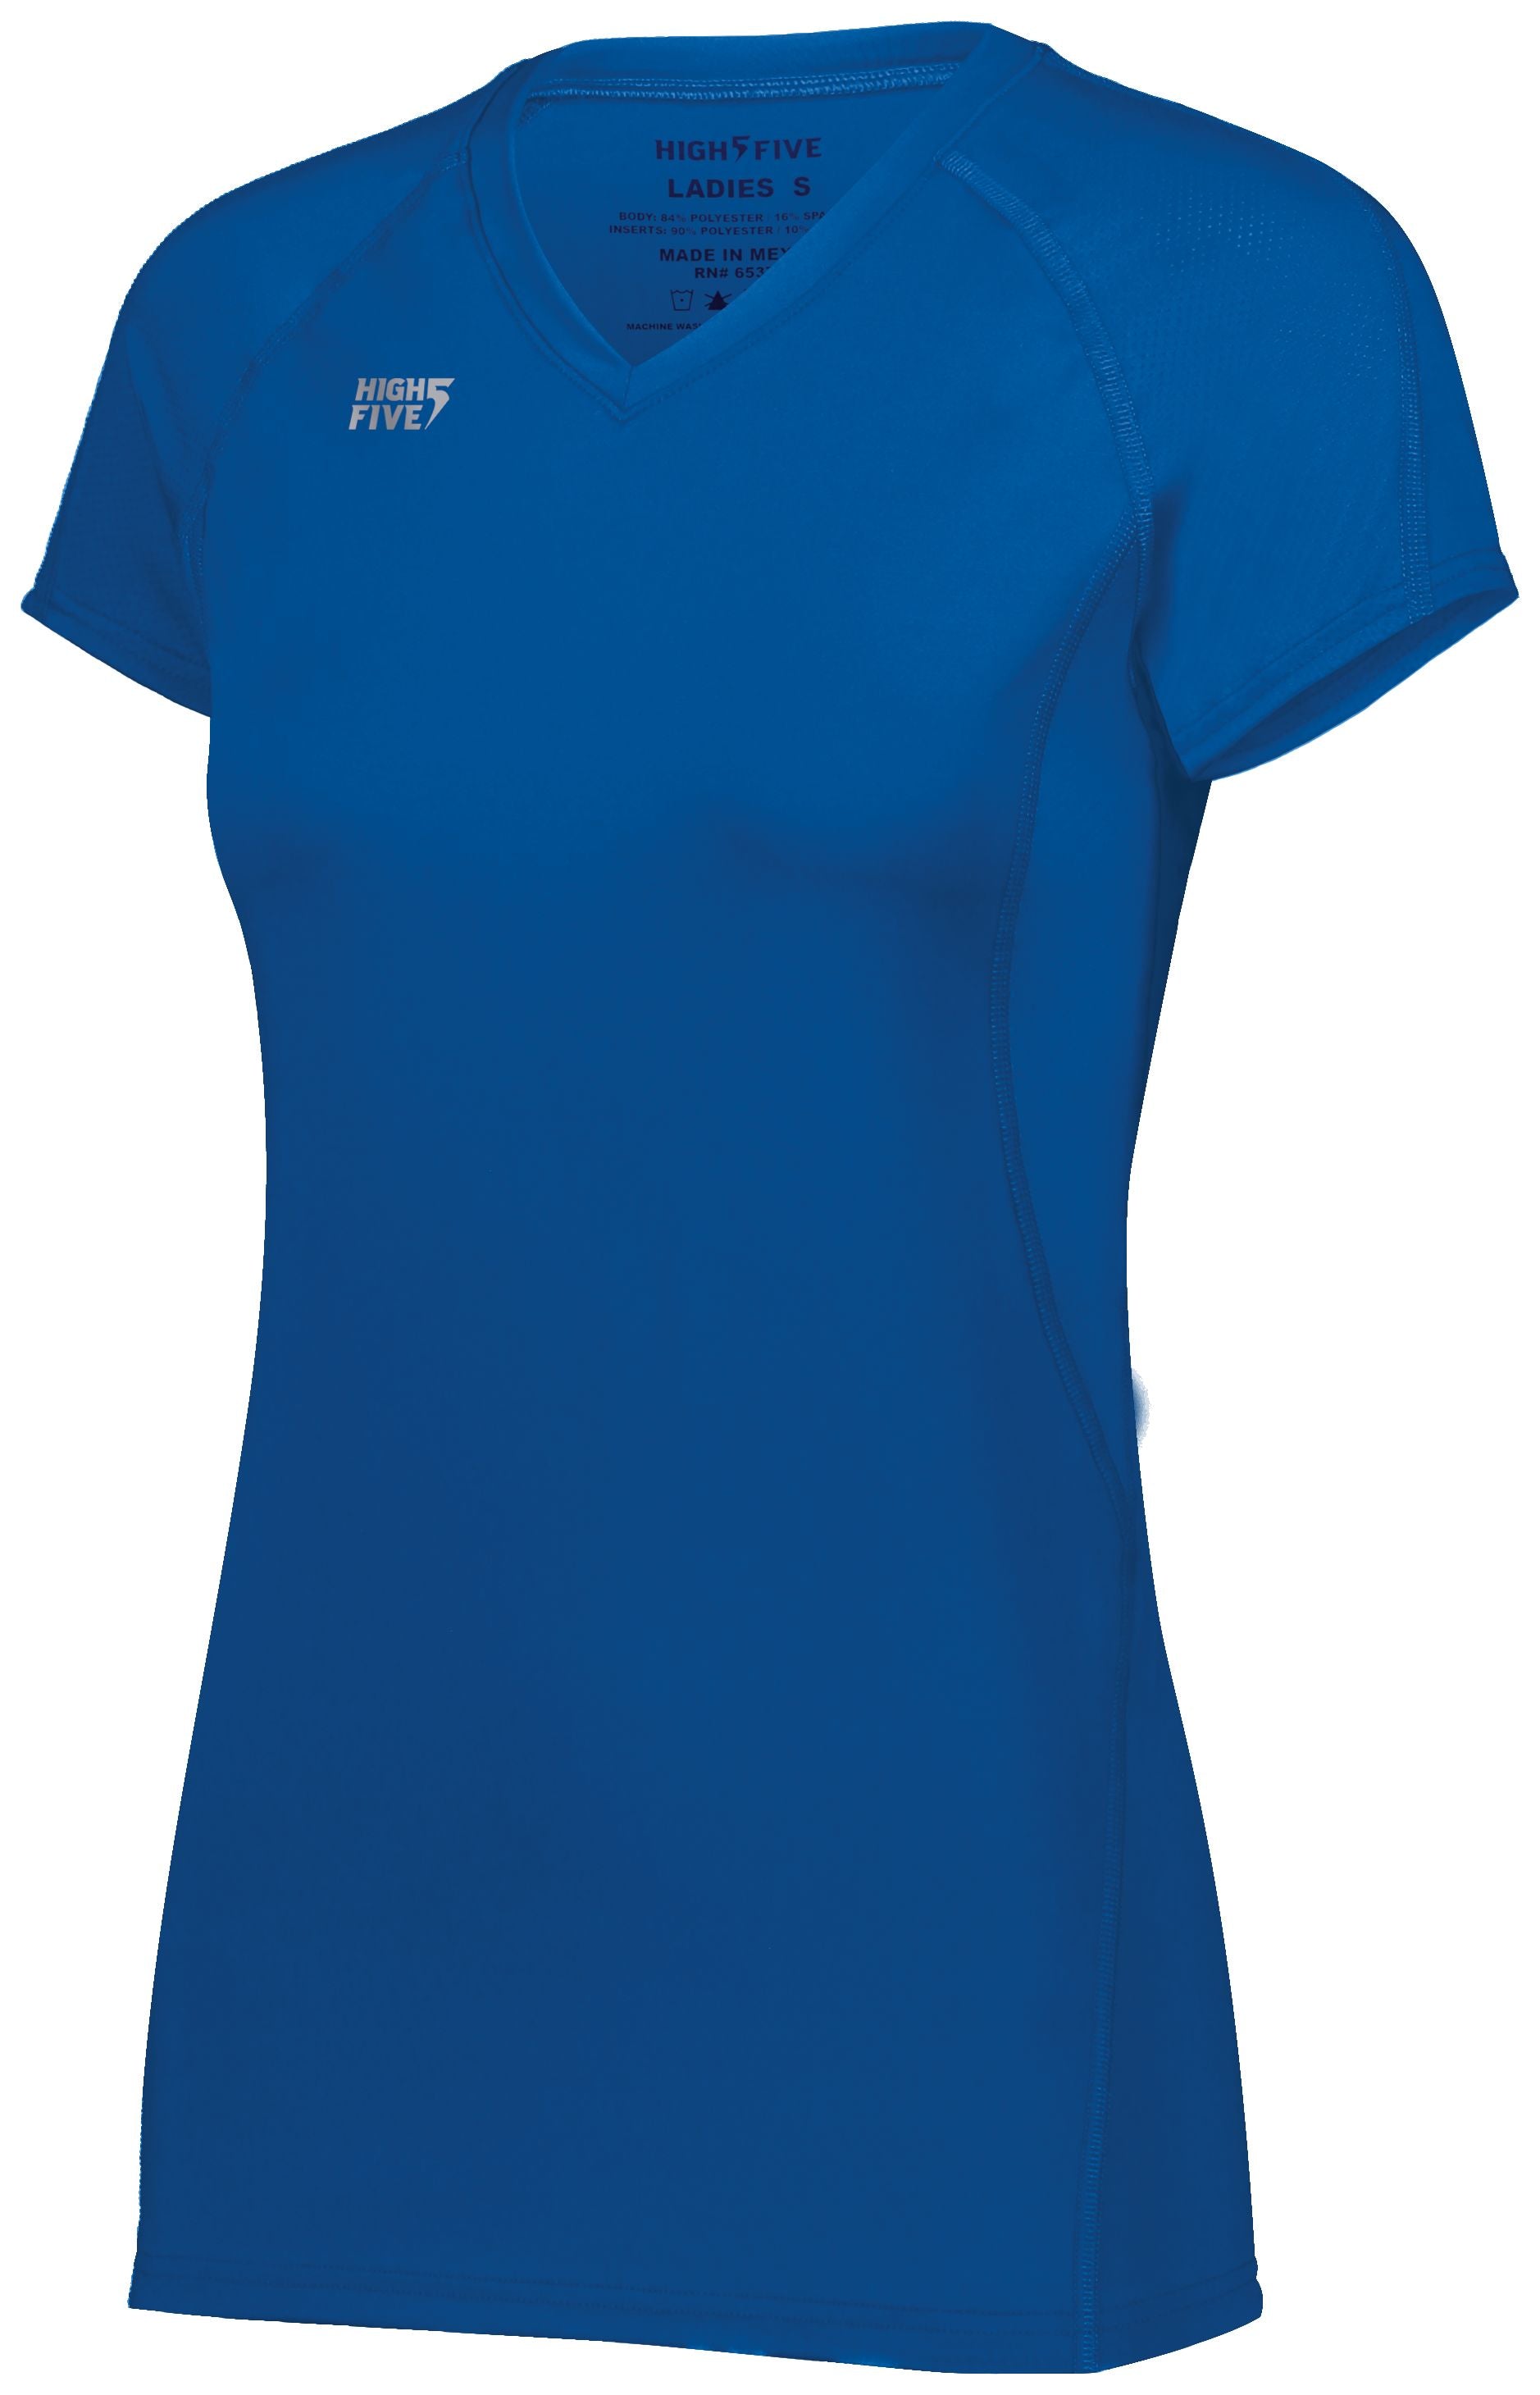 High 5 Girls Truhit Short Sleeve Jersey in Royal  -Part of the Girls, High5-Products, Volleyball, Girls-Jersey, Shirts product lines at KanaleyCreations.com